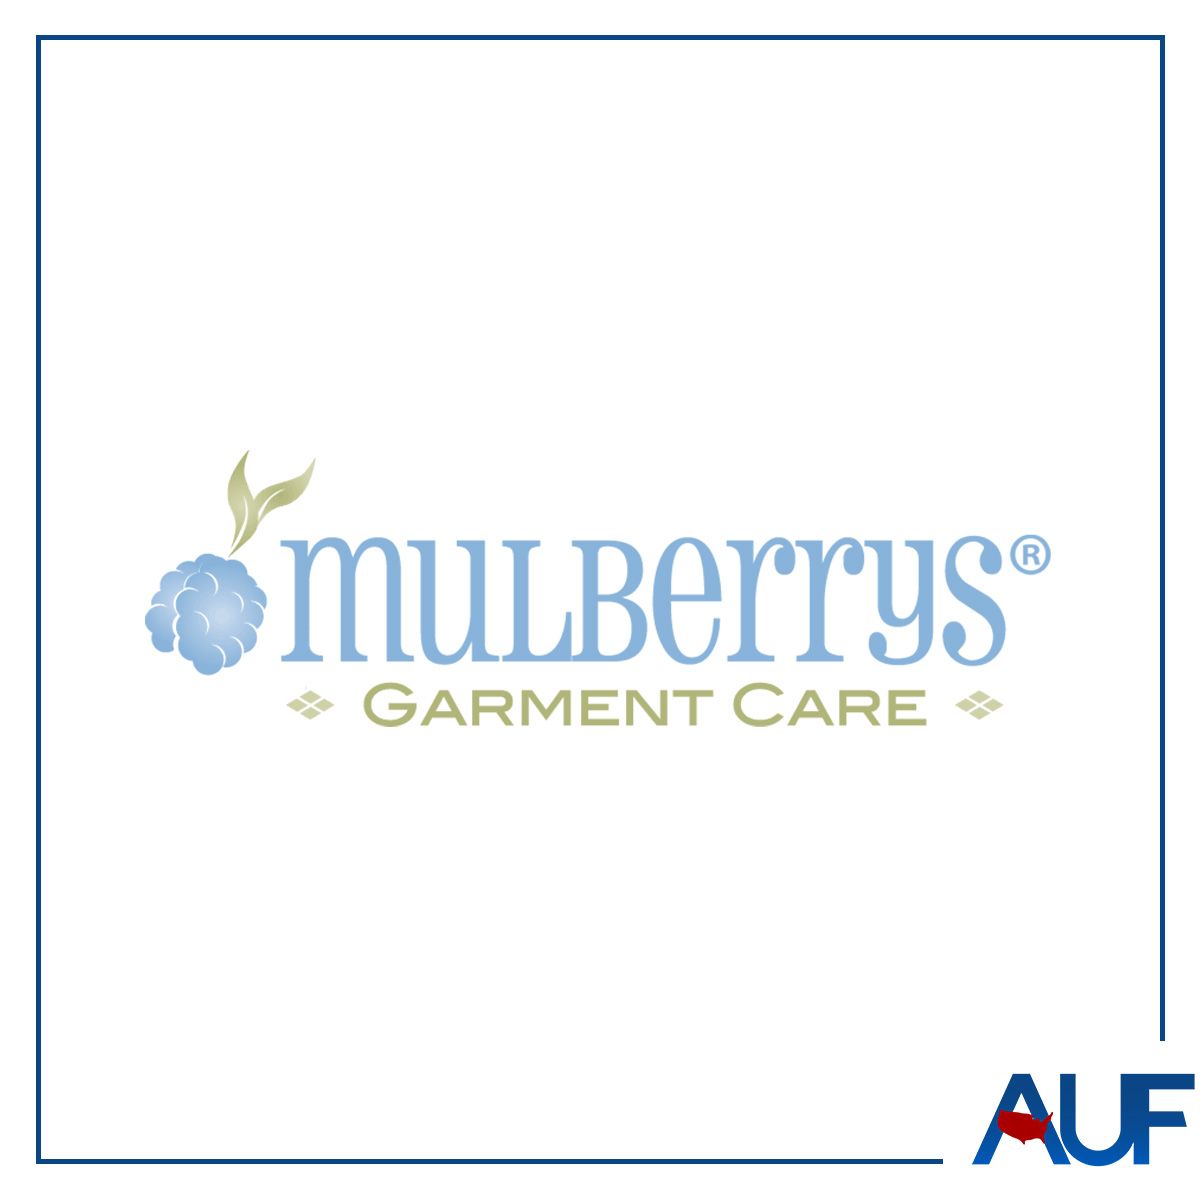 Multiple Pictures: Mulberrys Garment Care